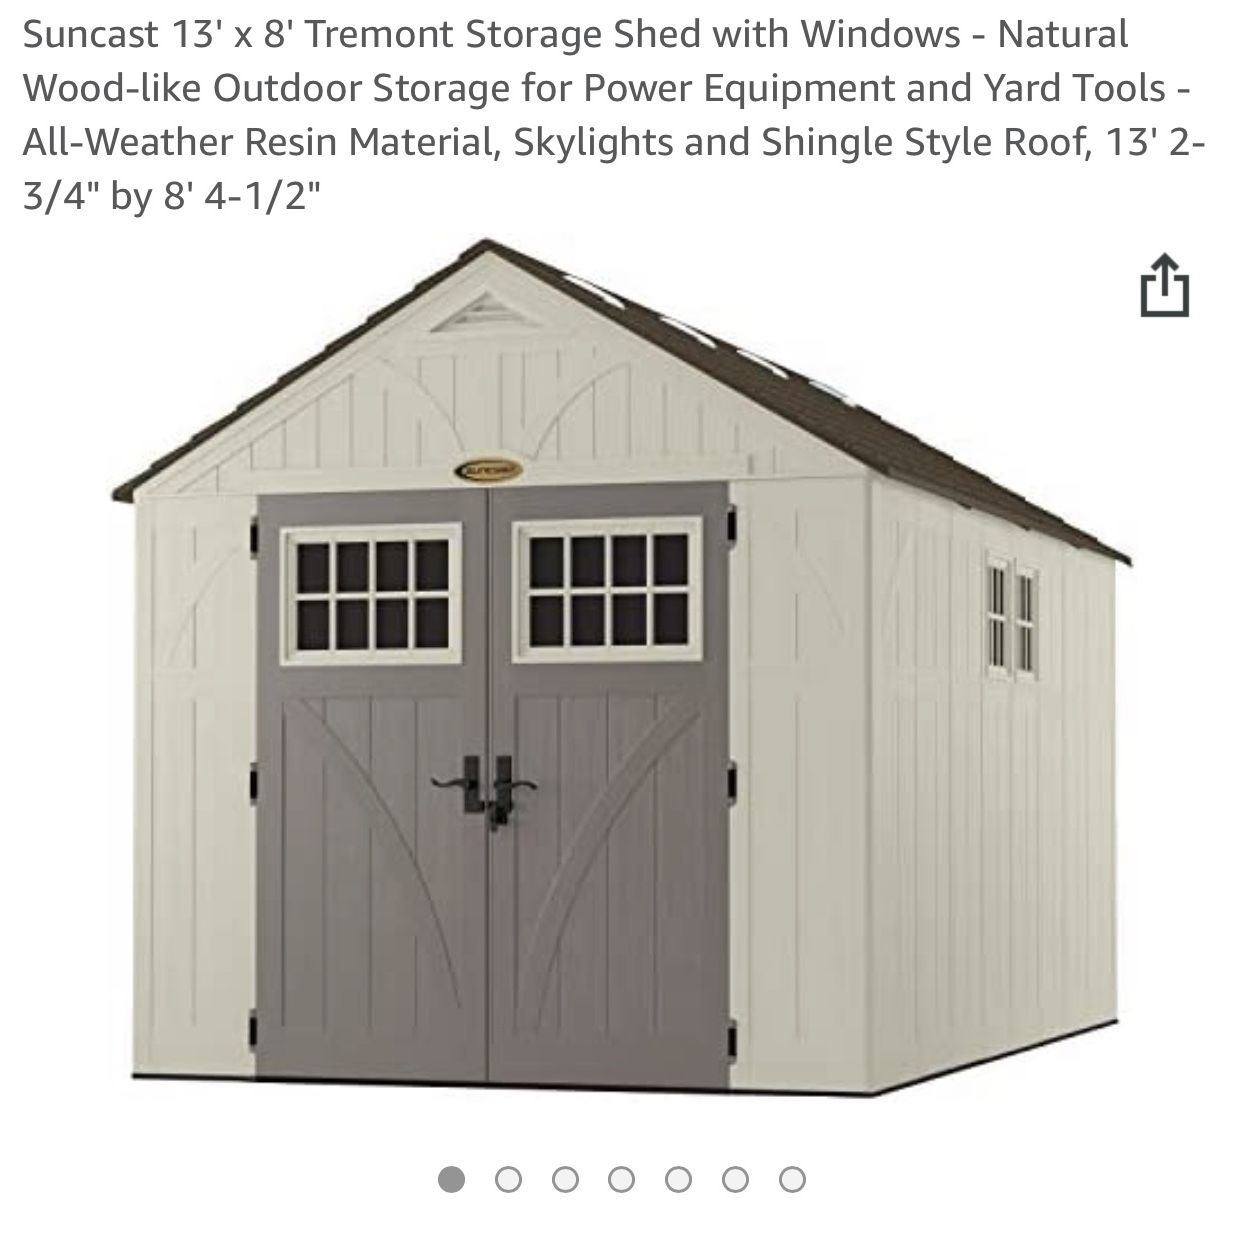 Suncast 13' x 8' Tremont Storage Shed with Windows - Natural Wood-like Outdoor Storage for Power Equipment and Yard Tools - All-Weather Resin Material